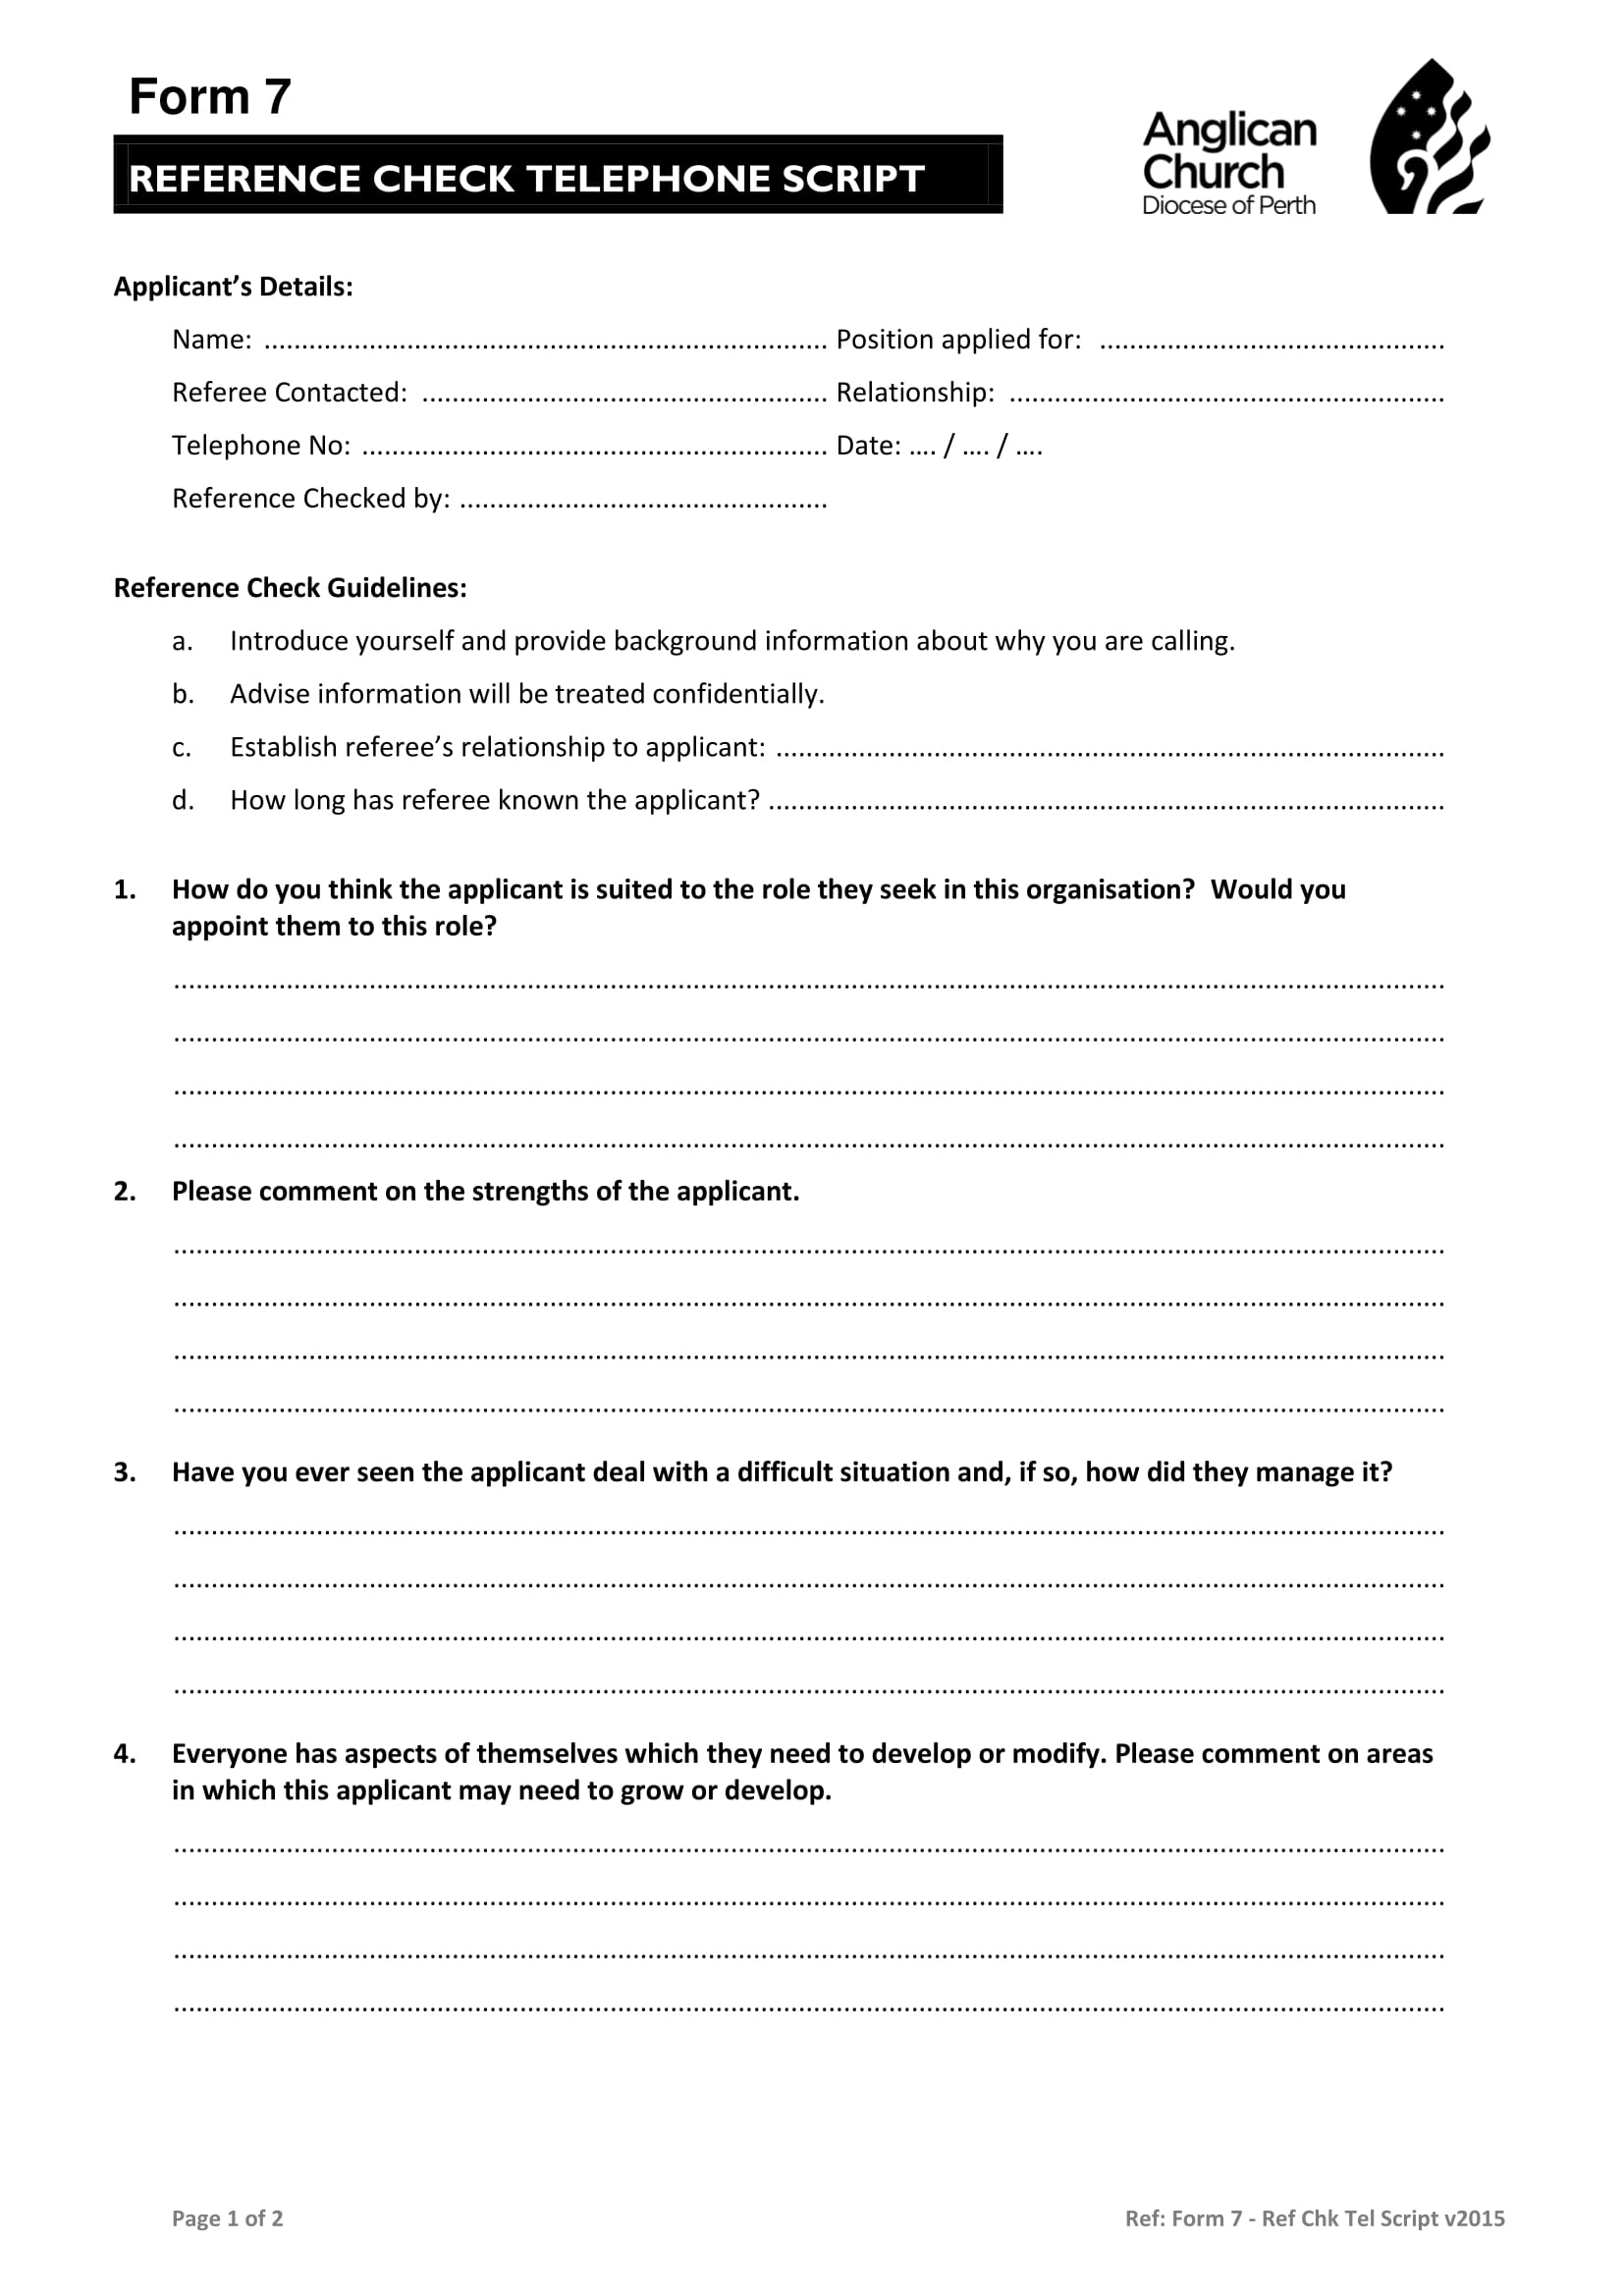 applicant reference check telephone script form 1